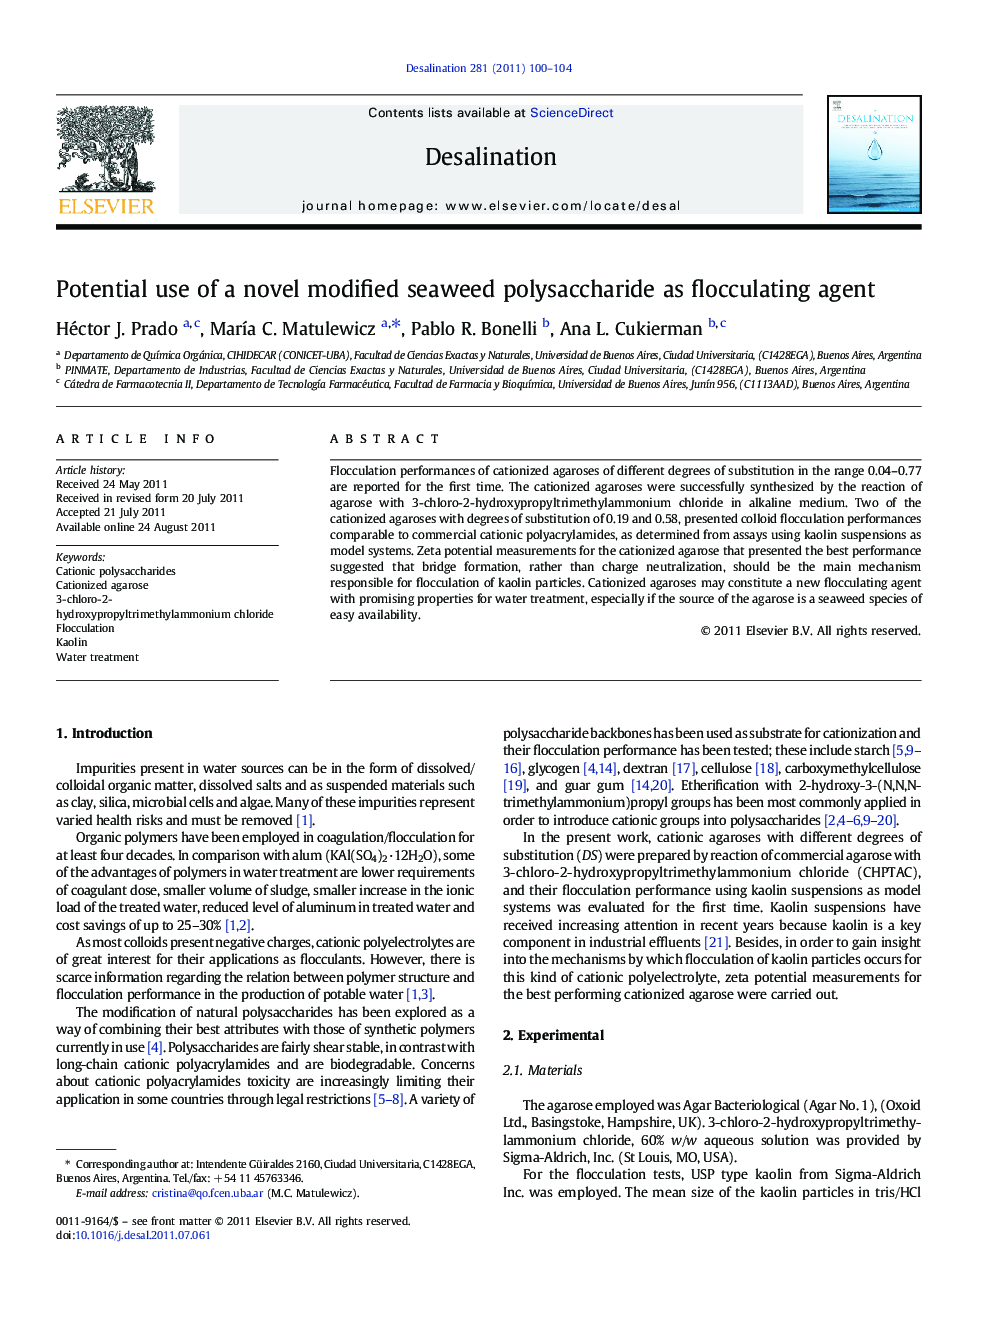 Potential use of a novel modified seaweed polysaccharide as flocculating agent